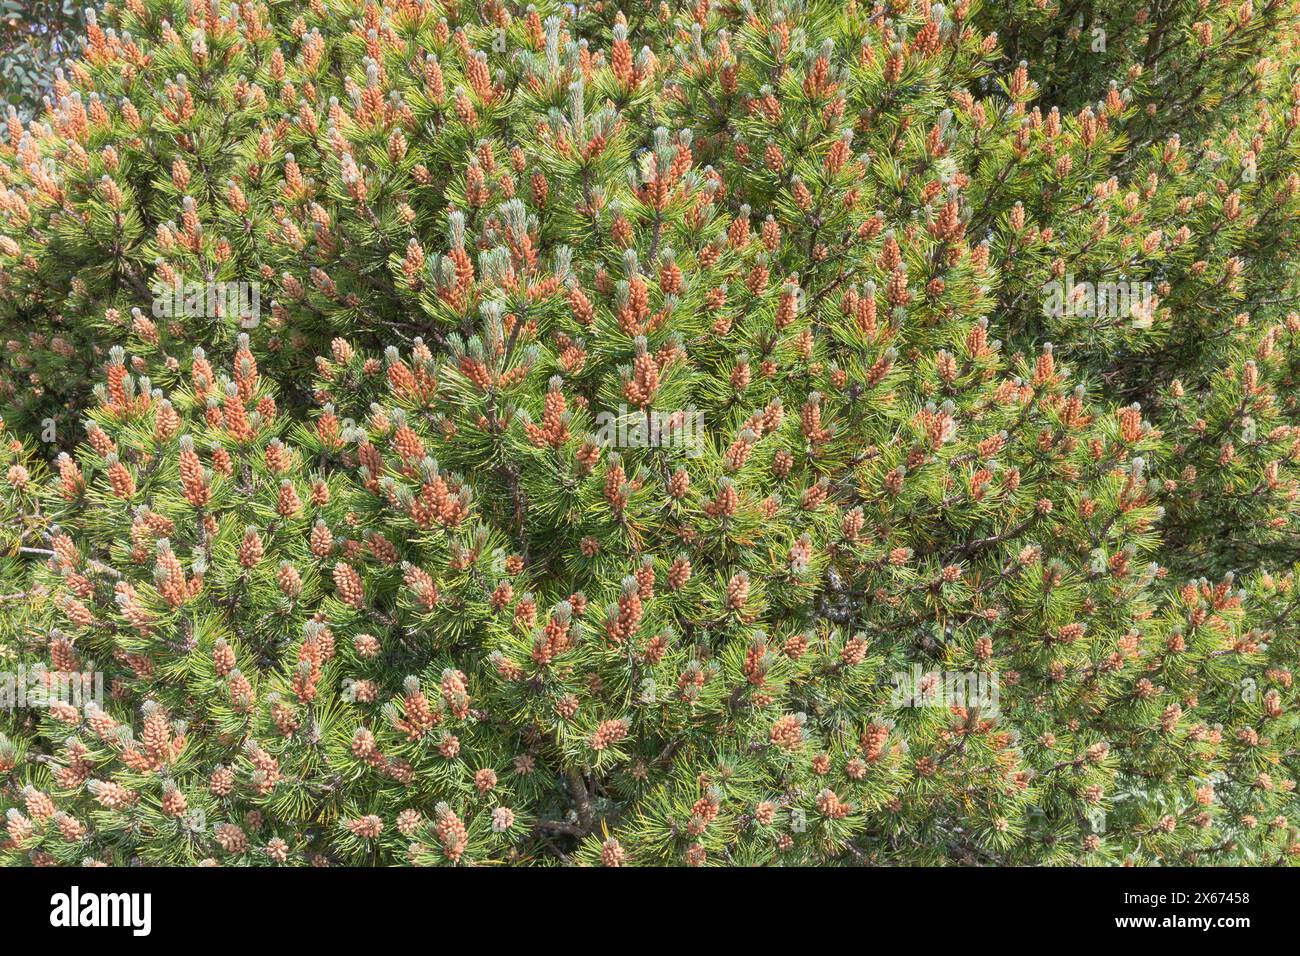 Needle laden branches of the pinusmugo ophir, with the early stages of thebrown cones forming Stock Photo